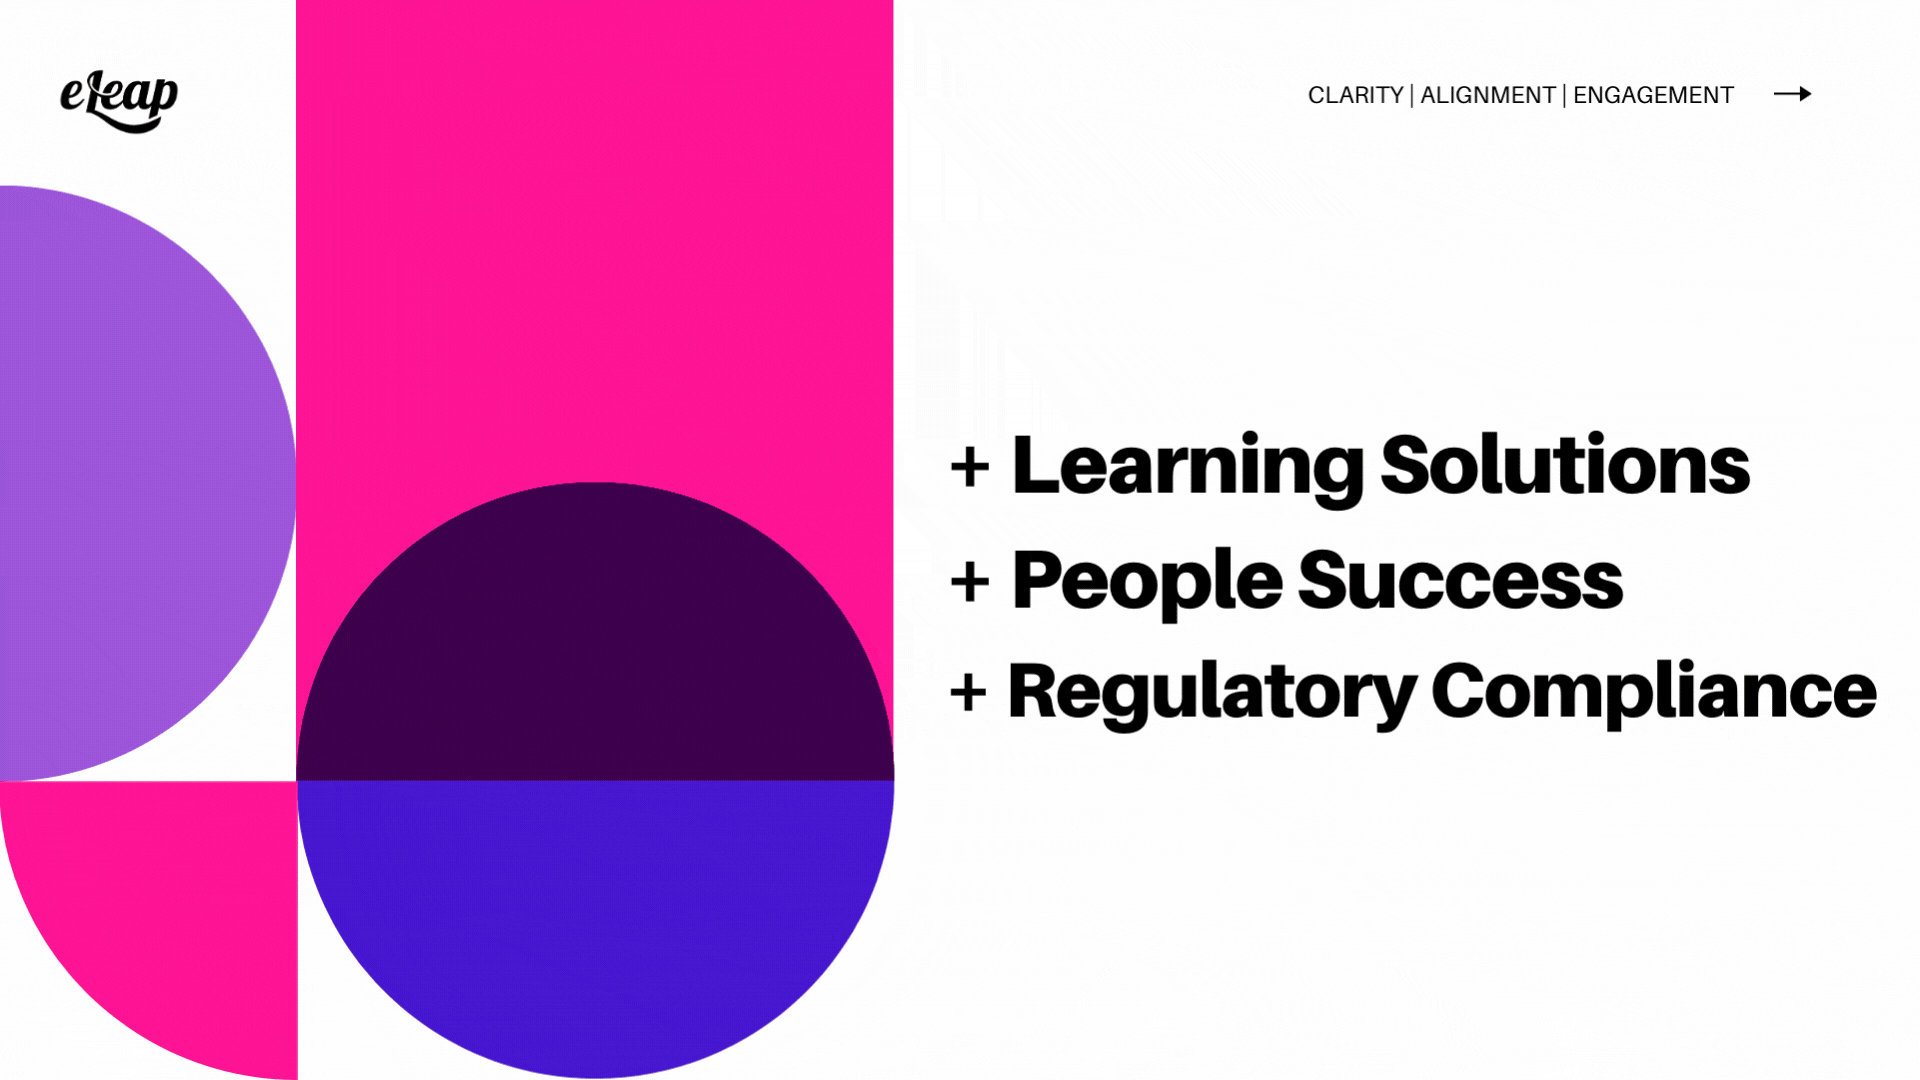 Learning Solutions, People Success, Regulatory Compliance